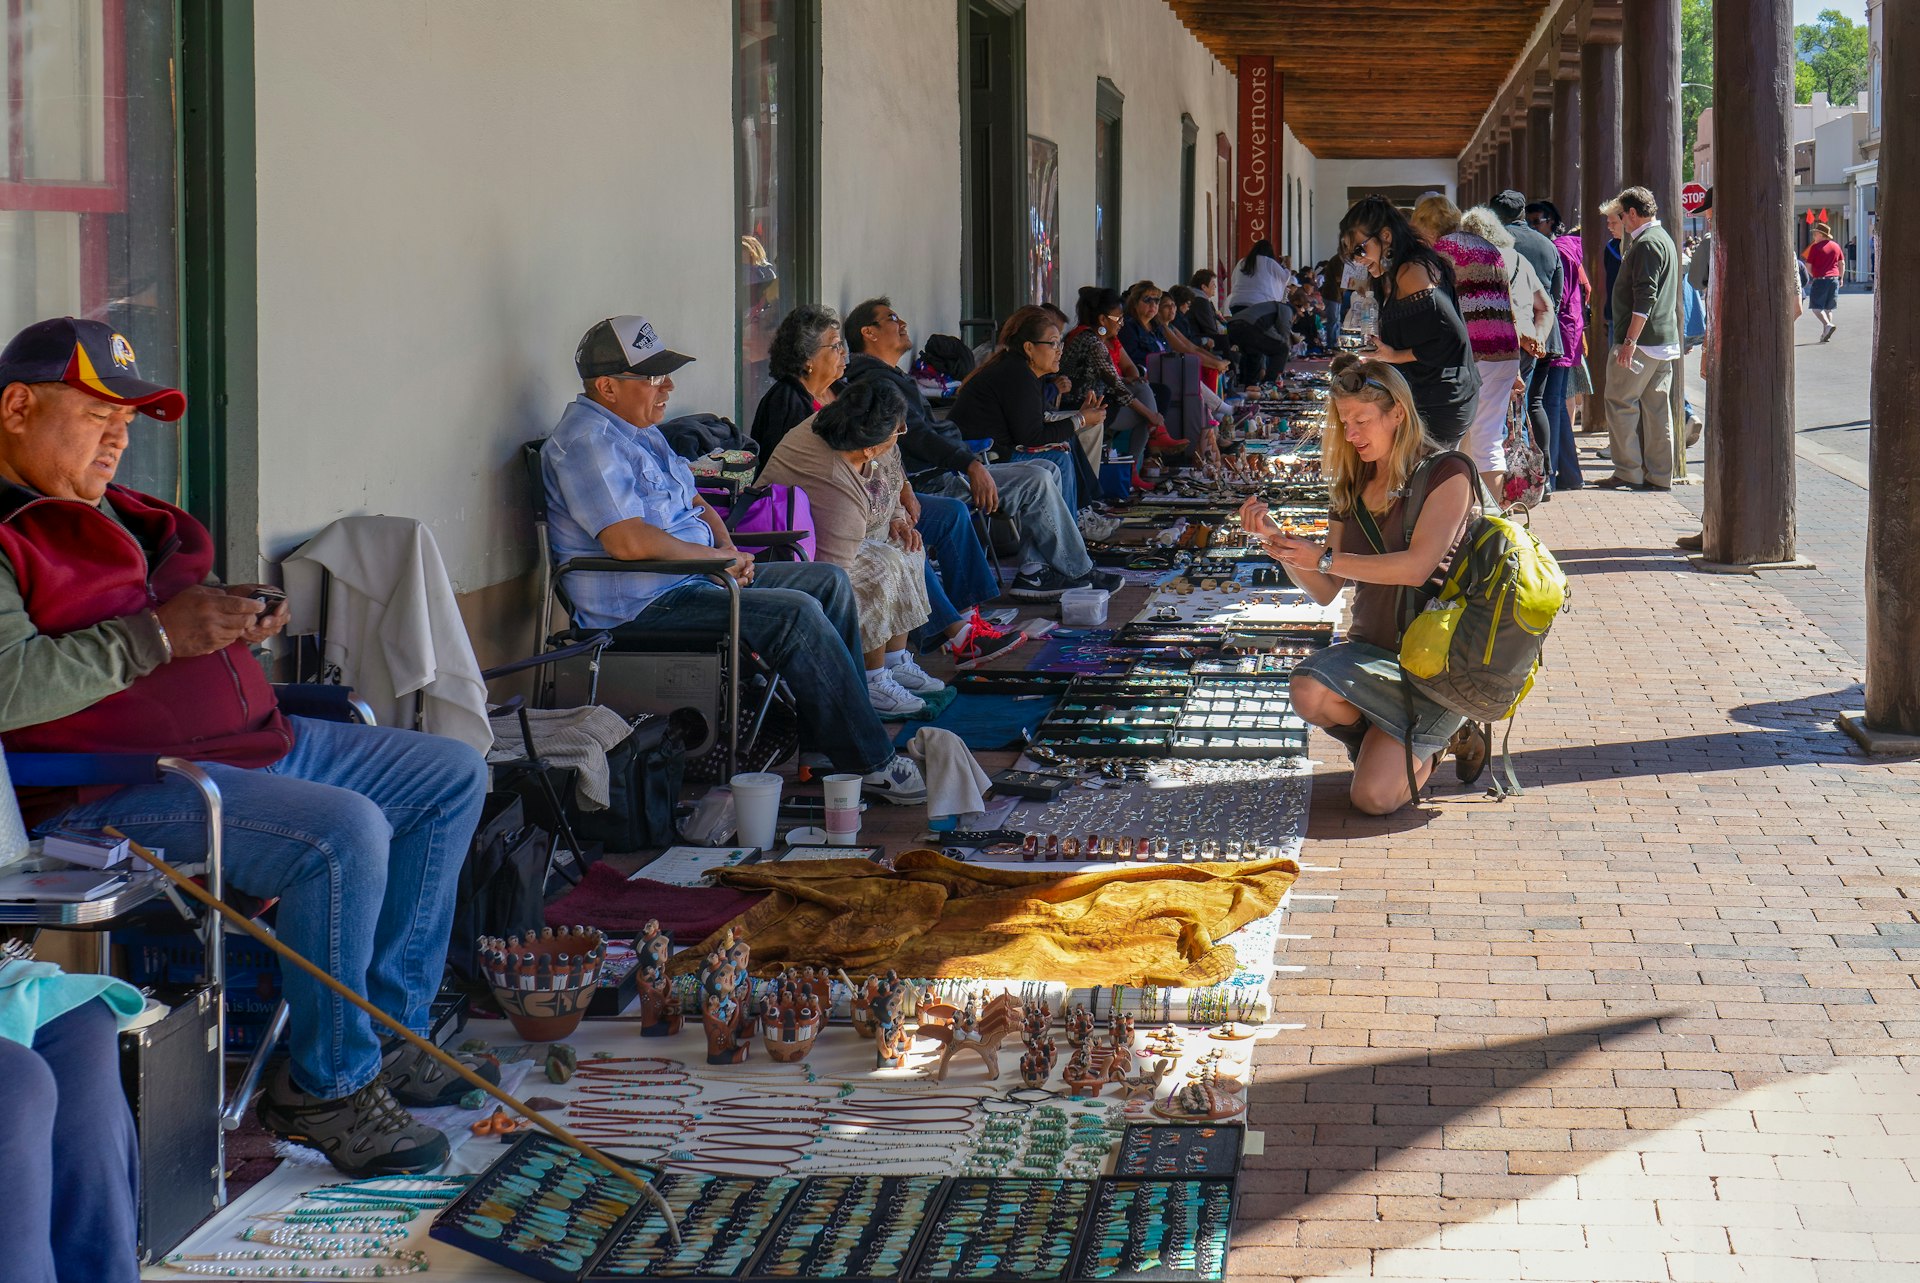 Arts and crafts vendors sell their wares in Santa Fe, New Mexico